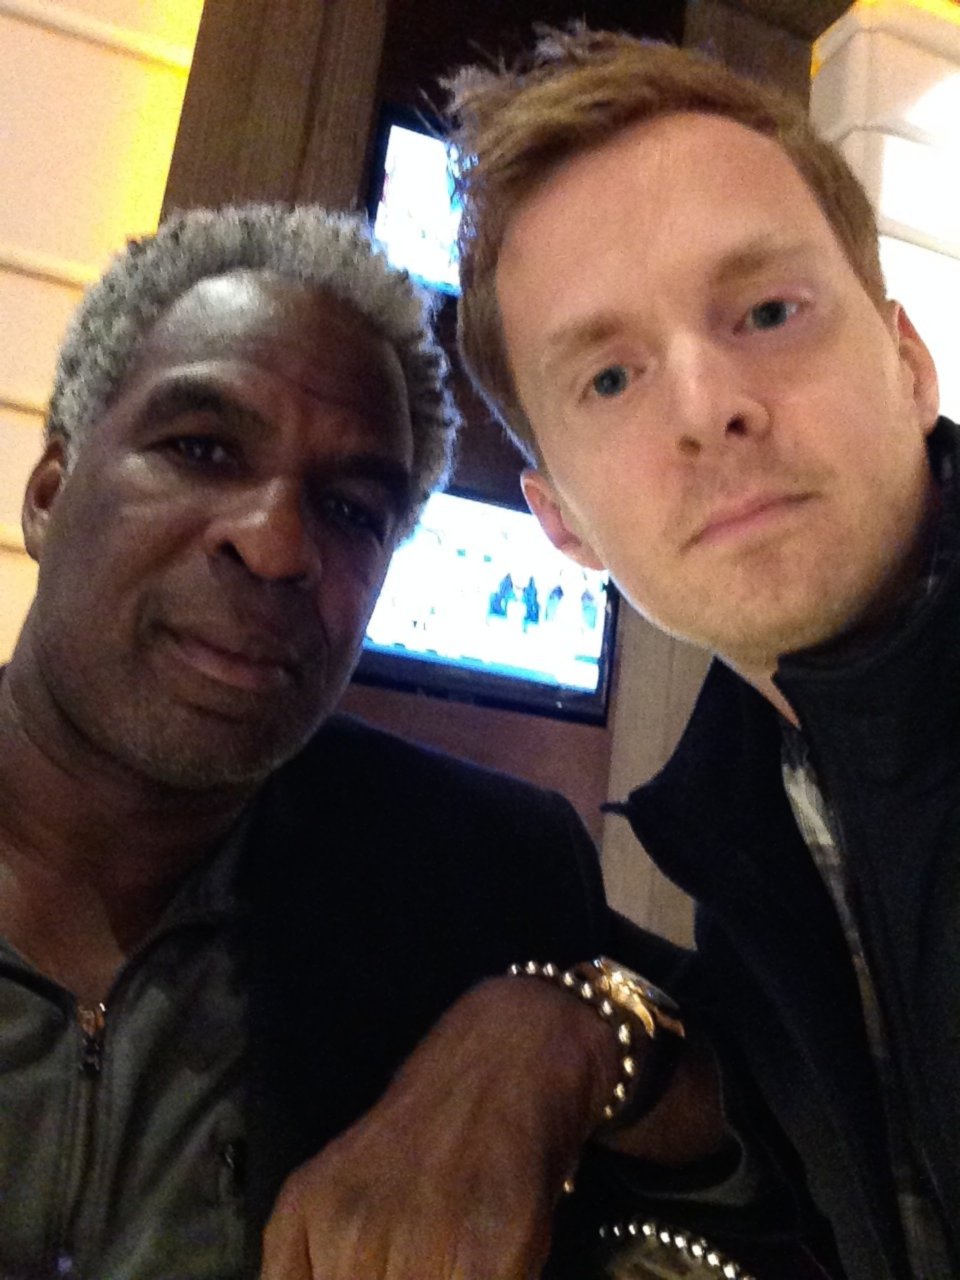 PHOTO: Dennis Doyle met his favorite former Knicks player Charles Oakley while following the team. 